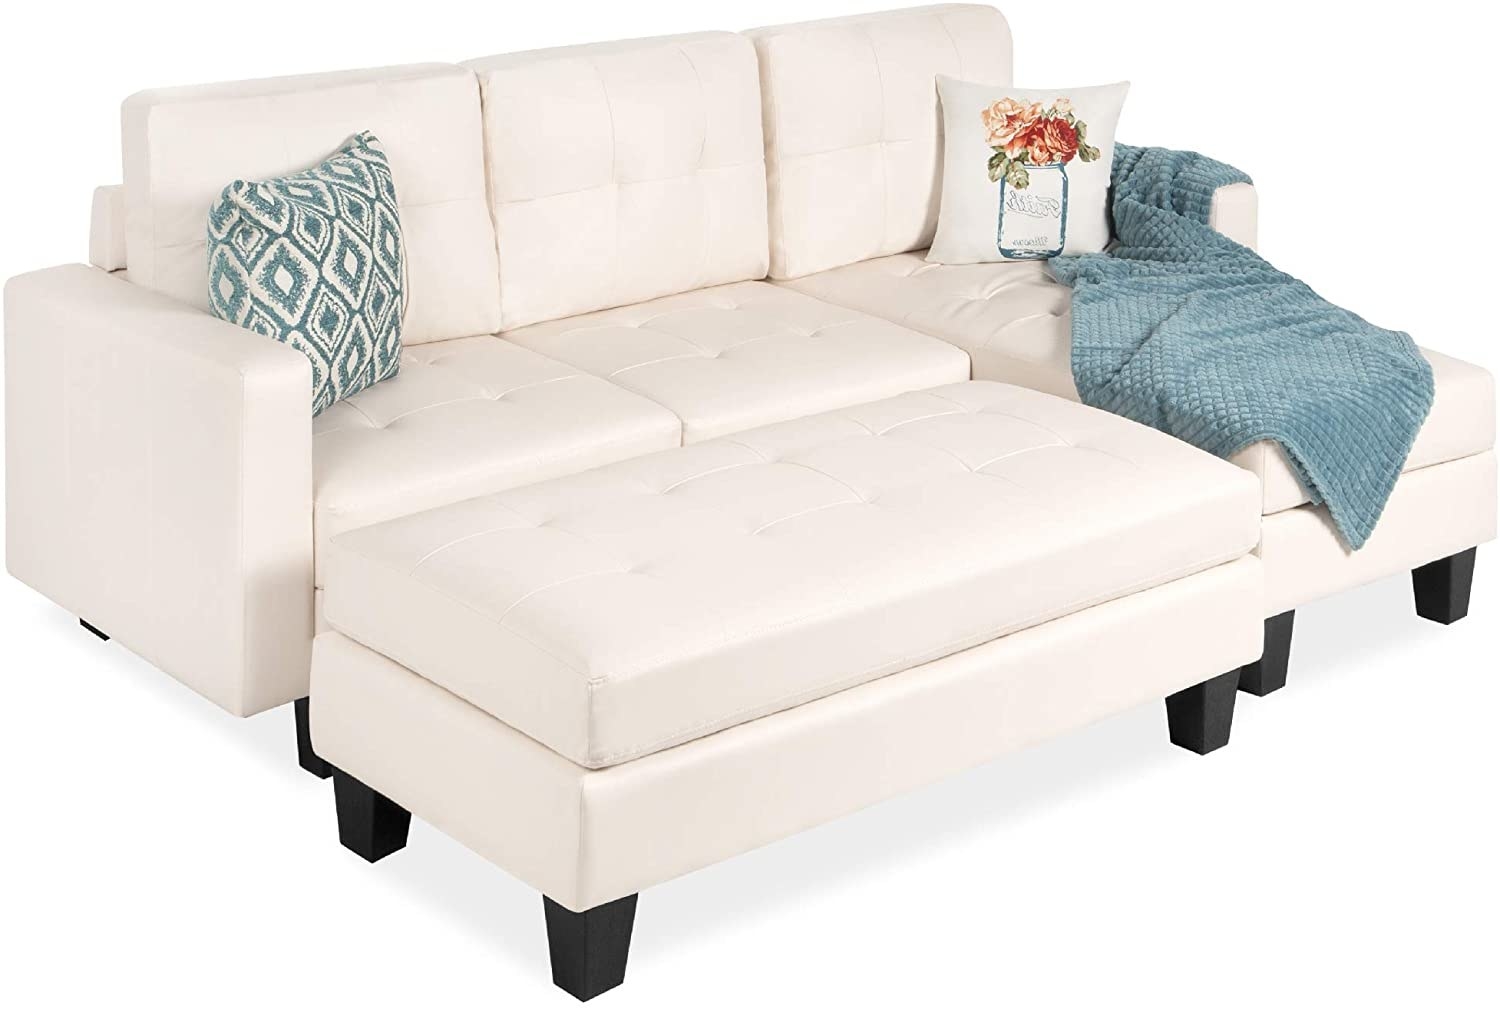 A white faux leather couch with blue accents